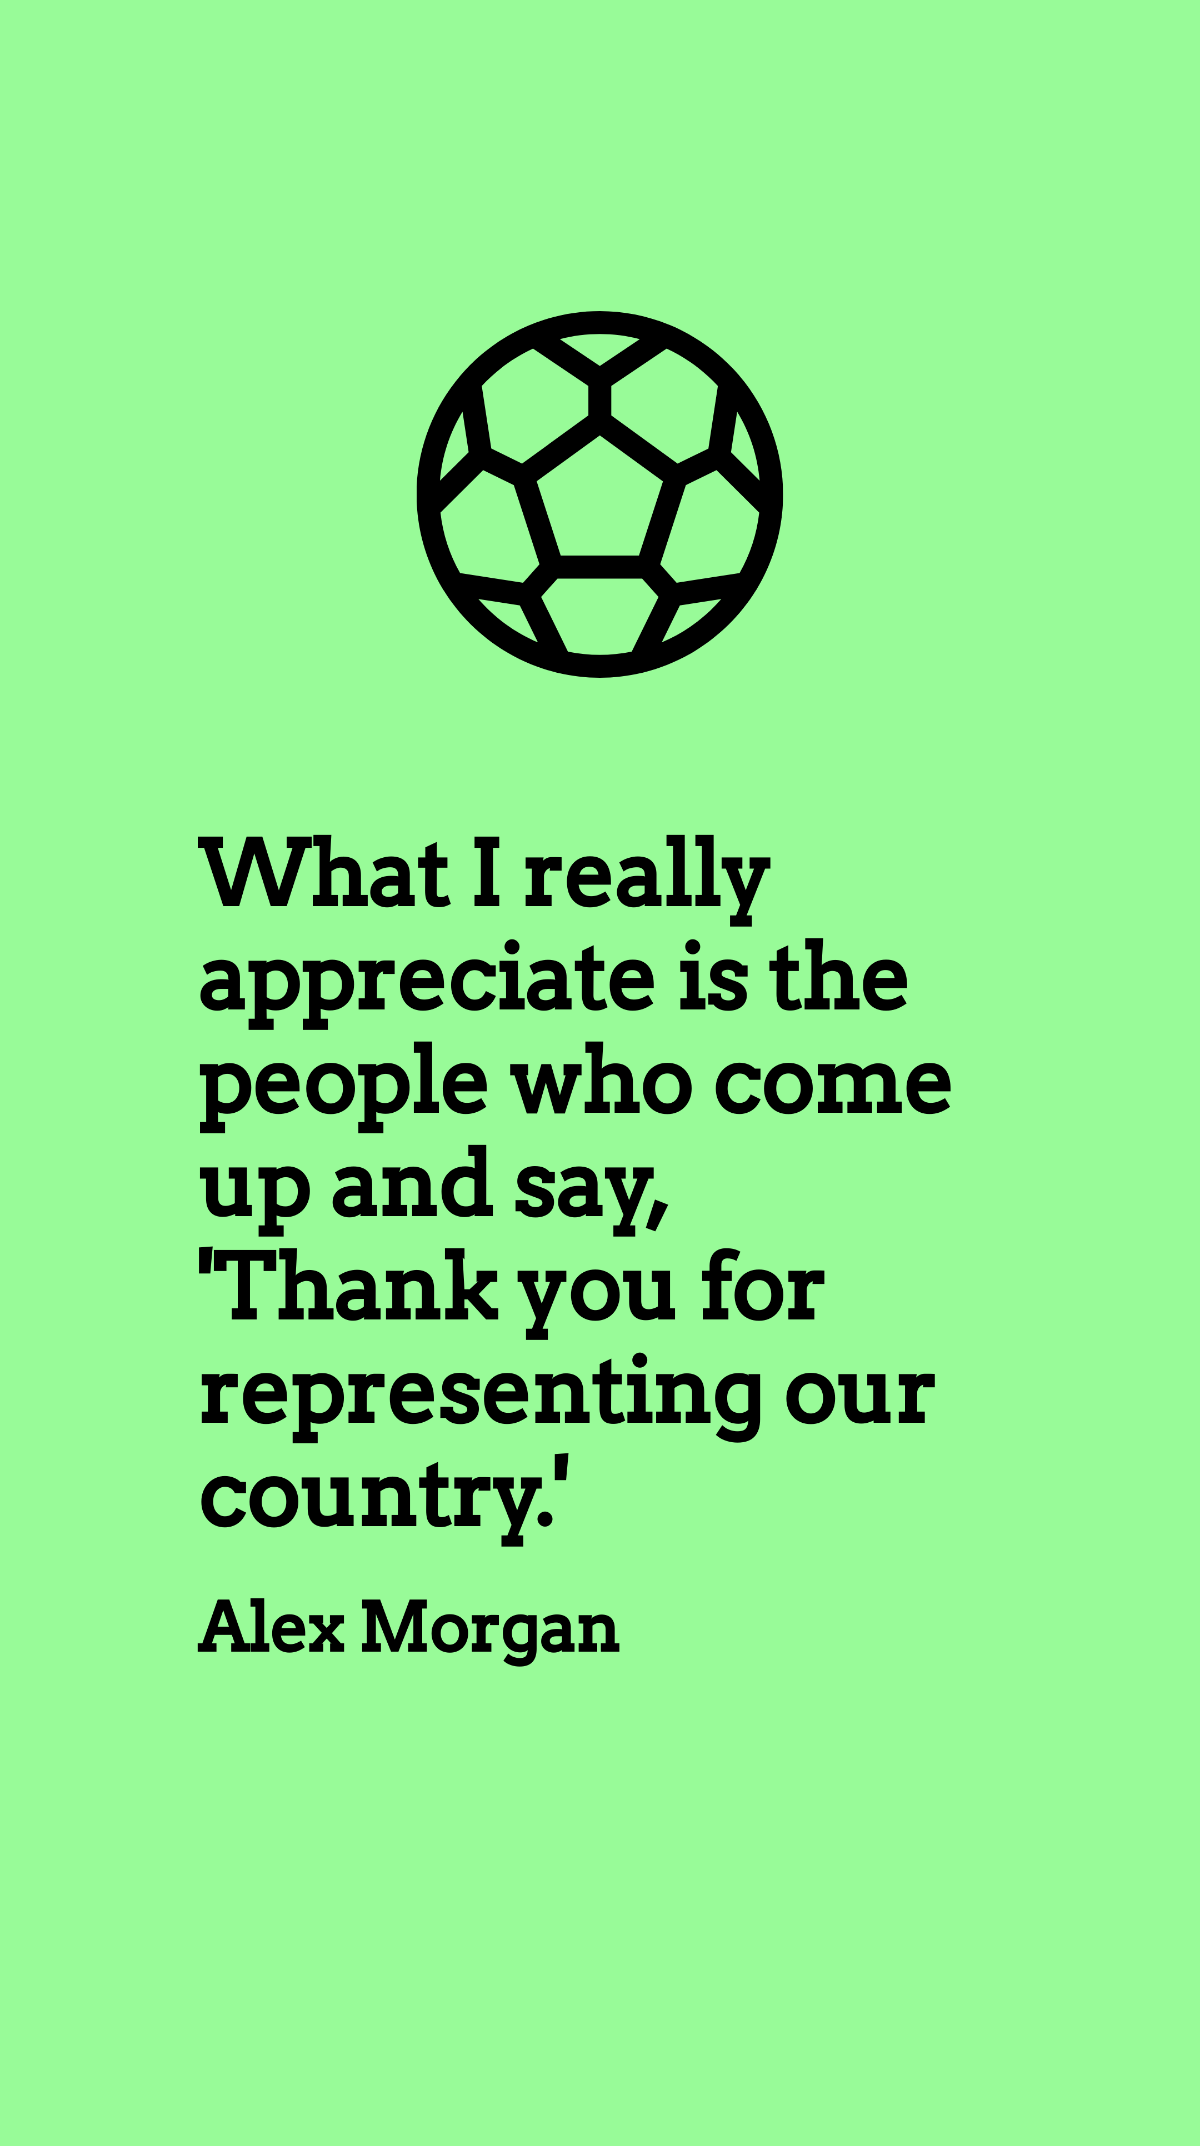 Alex Morgan - What I really appreciate is the people who come up and say, 'Thank you for representing our country.' Template